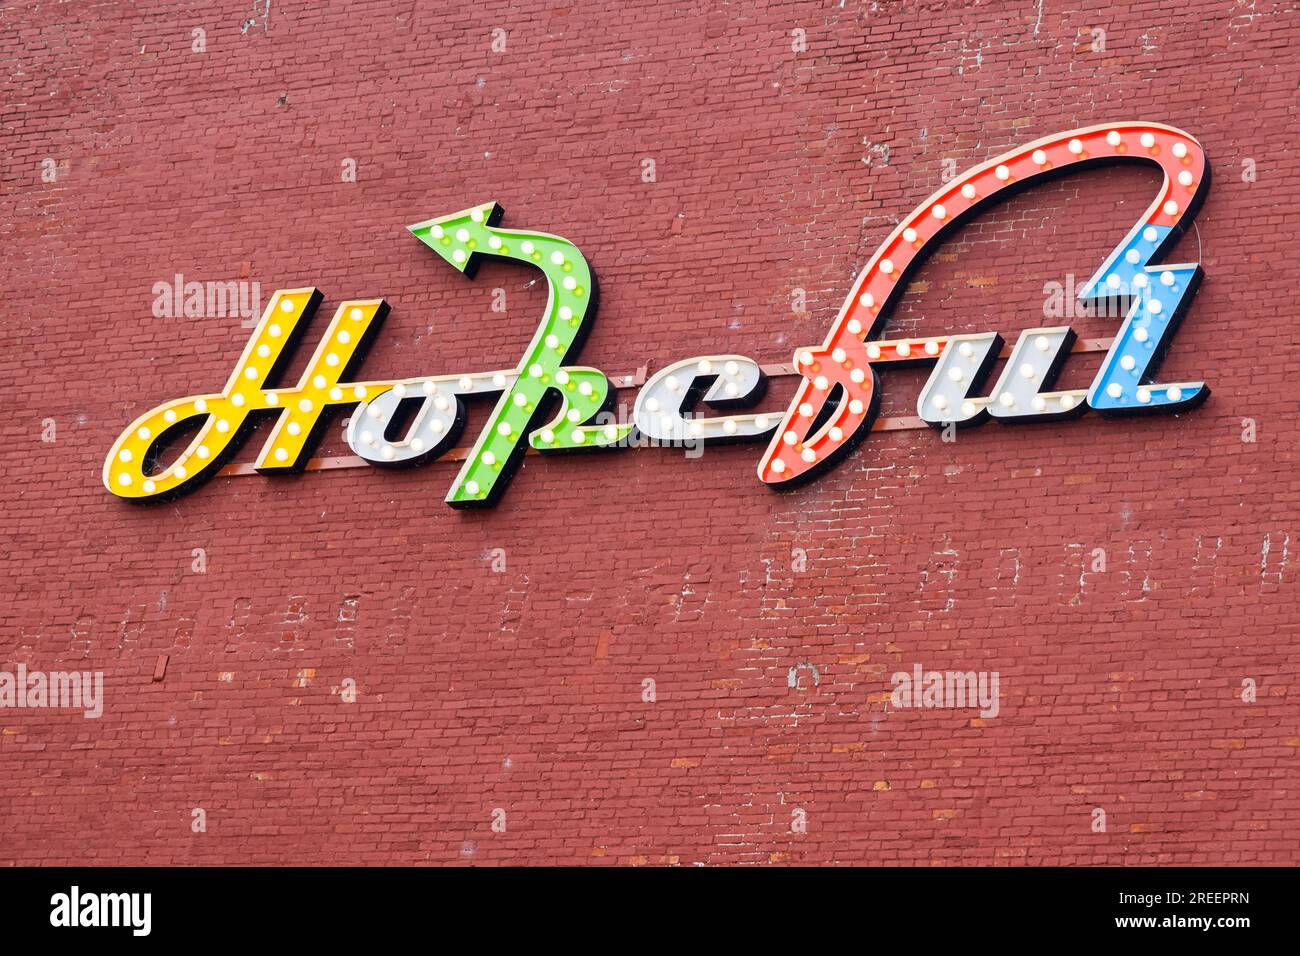 Hopeful positive inspiration sign on side of a red brick building Stock Photo